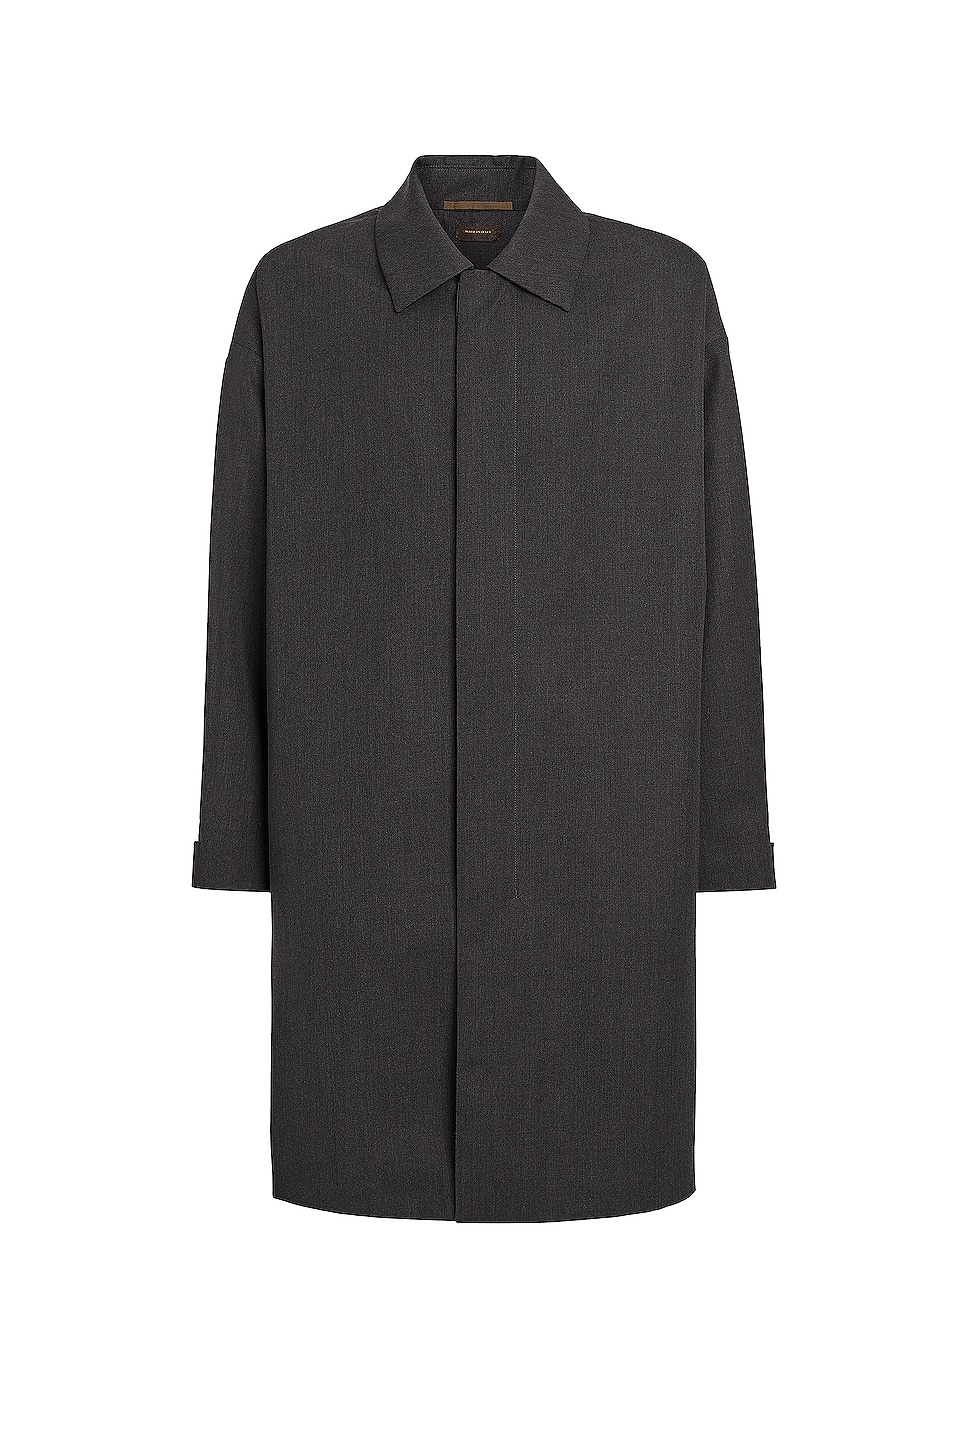 Image 1 of Fear of God Exclusively for Ermenegildo Zegna Trench Coat in Anthracite